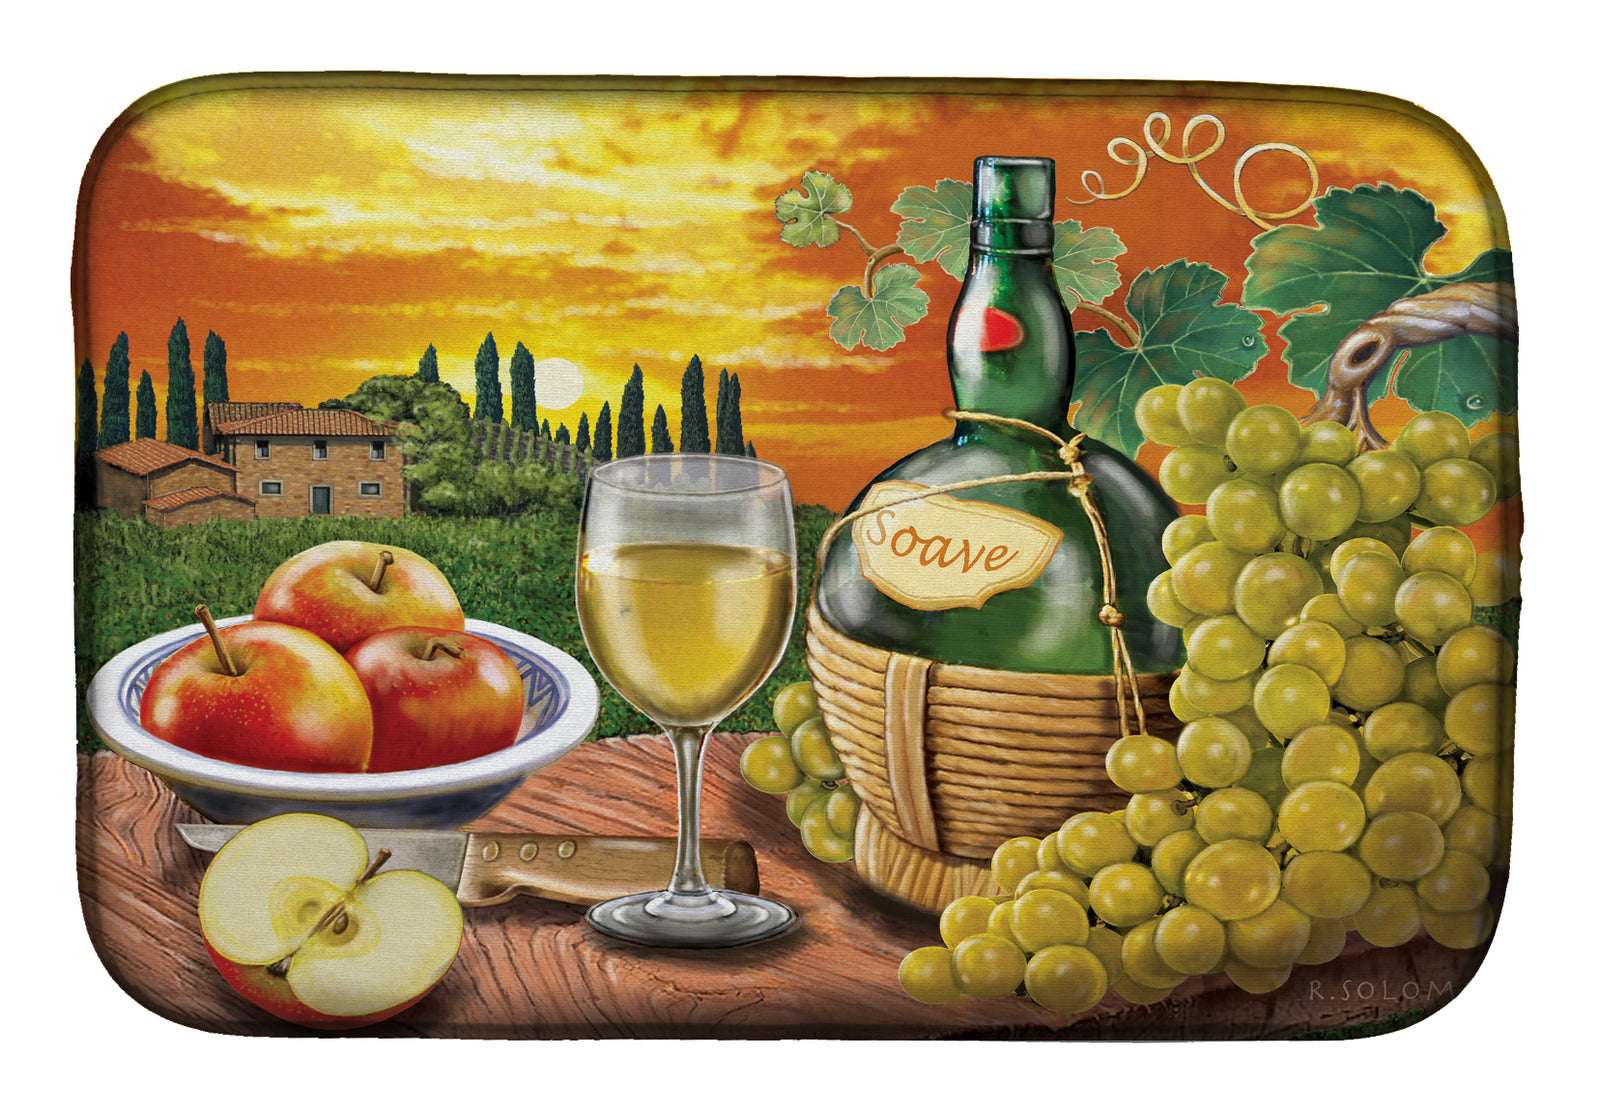 Soave, Apple, Wine and Cheese Dish Drying Mat PRS4027DDM